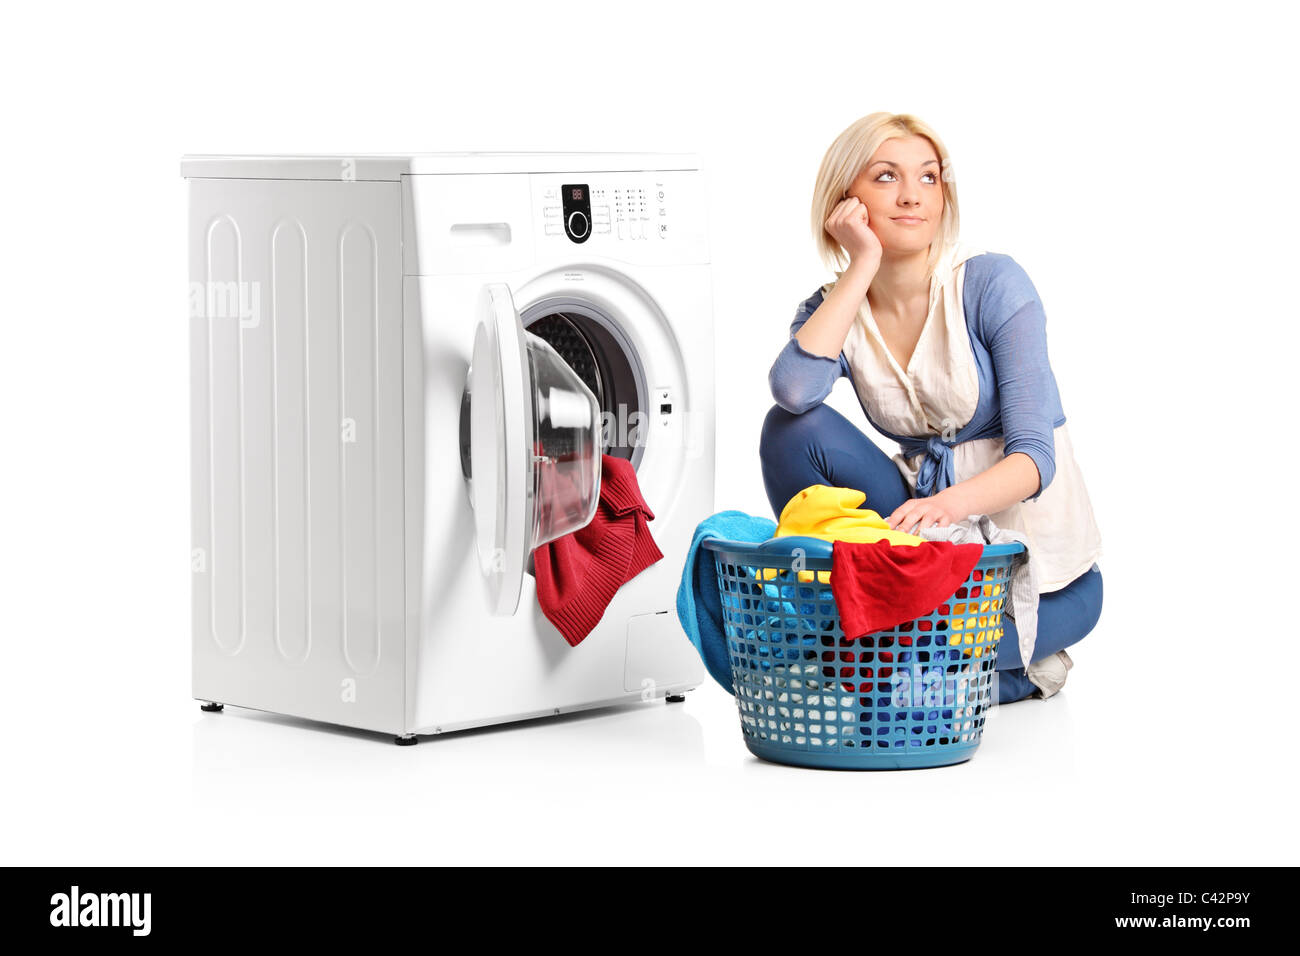 A young woman in thoughts with clothes seated next to a washing machine Stock Photo